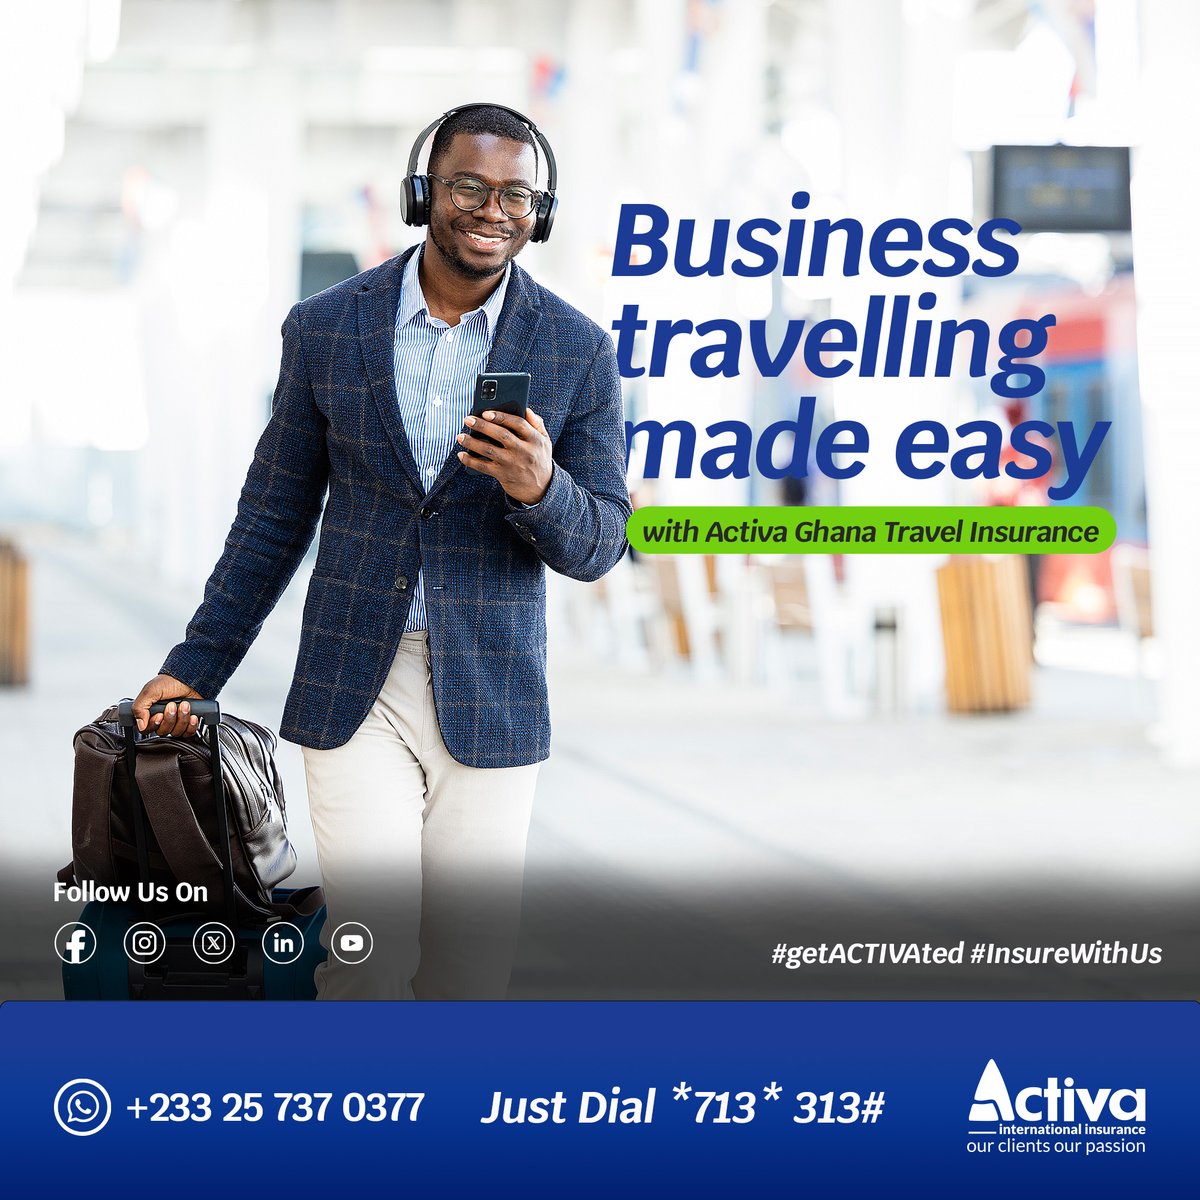 Seal the deal with confidence – Activa Ghana's Travel Insurance has your back on every business trip.

#getACTIVAted #InsureWithUs #Insurance #TravelInsurance #SmartInsurance #InsuranceMadeEasy #Business #ActivaGhana #ActivaInsurance